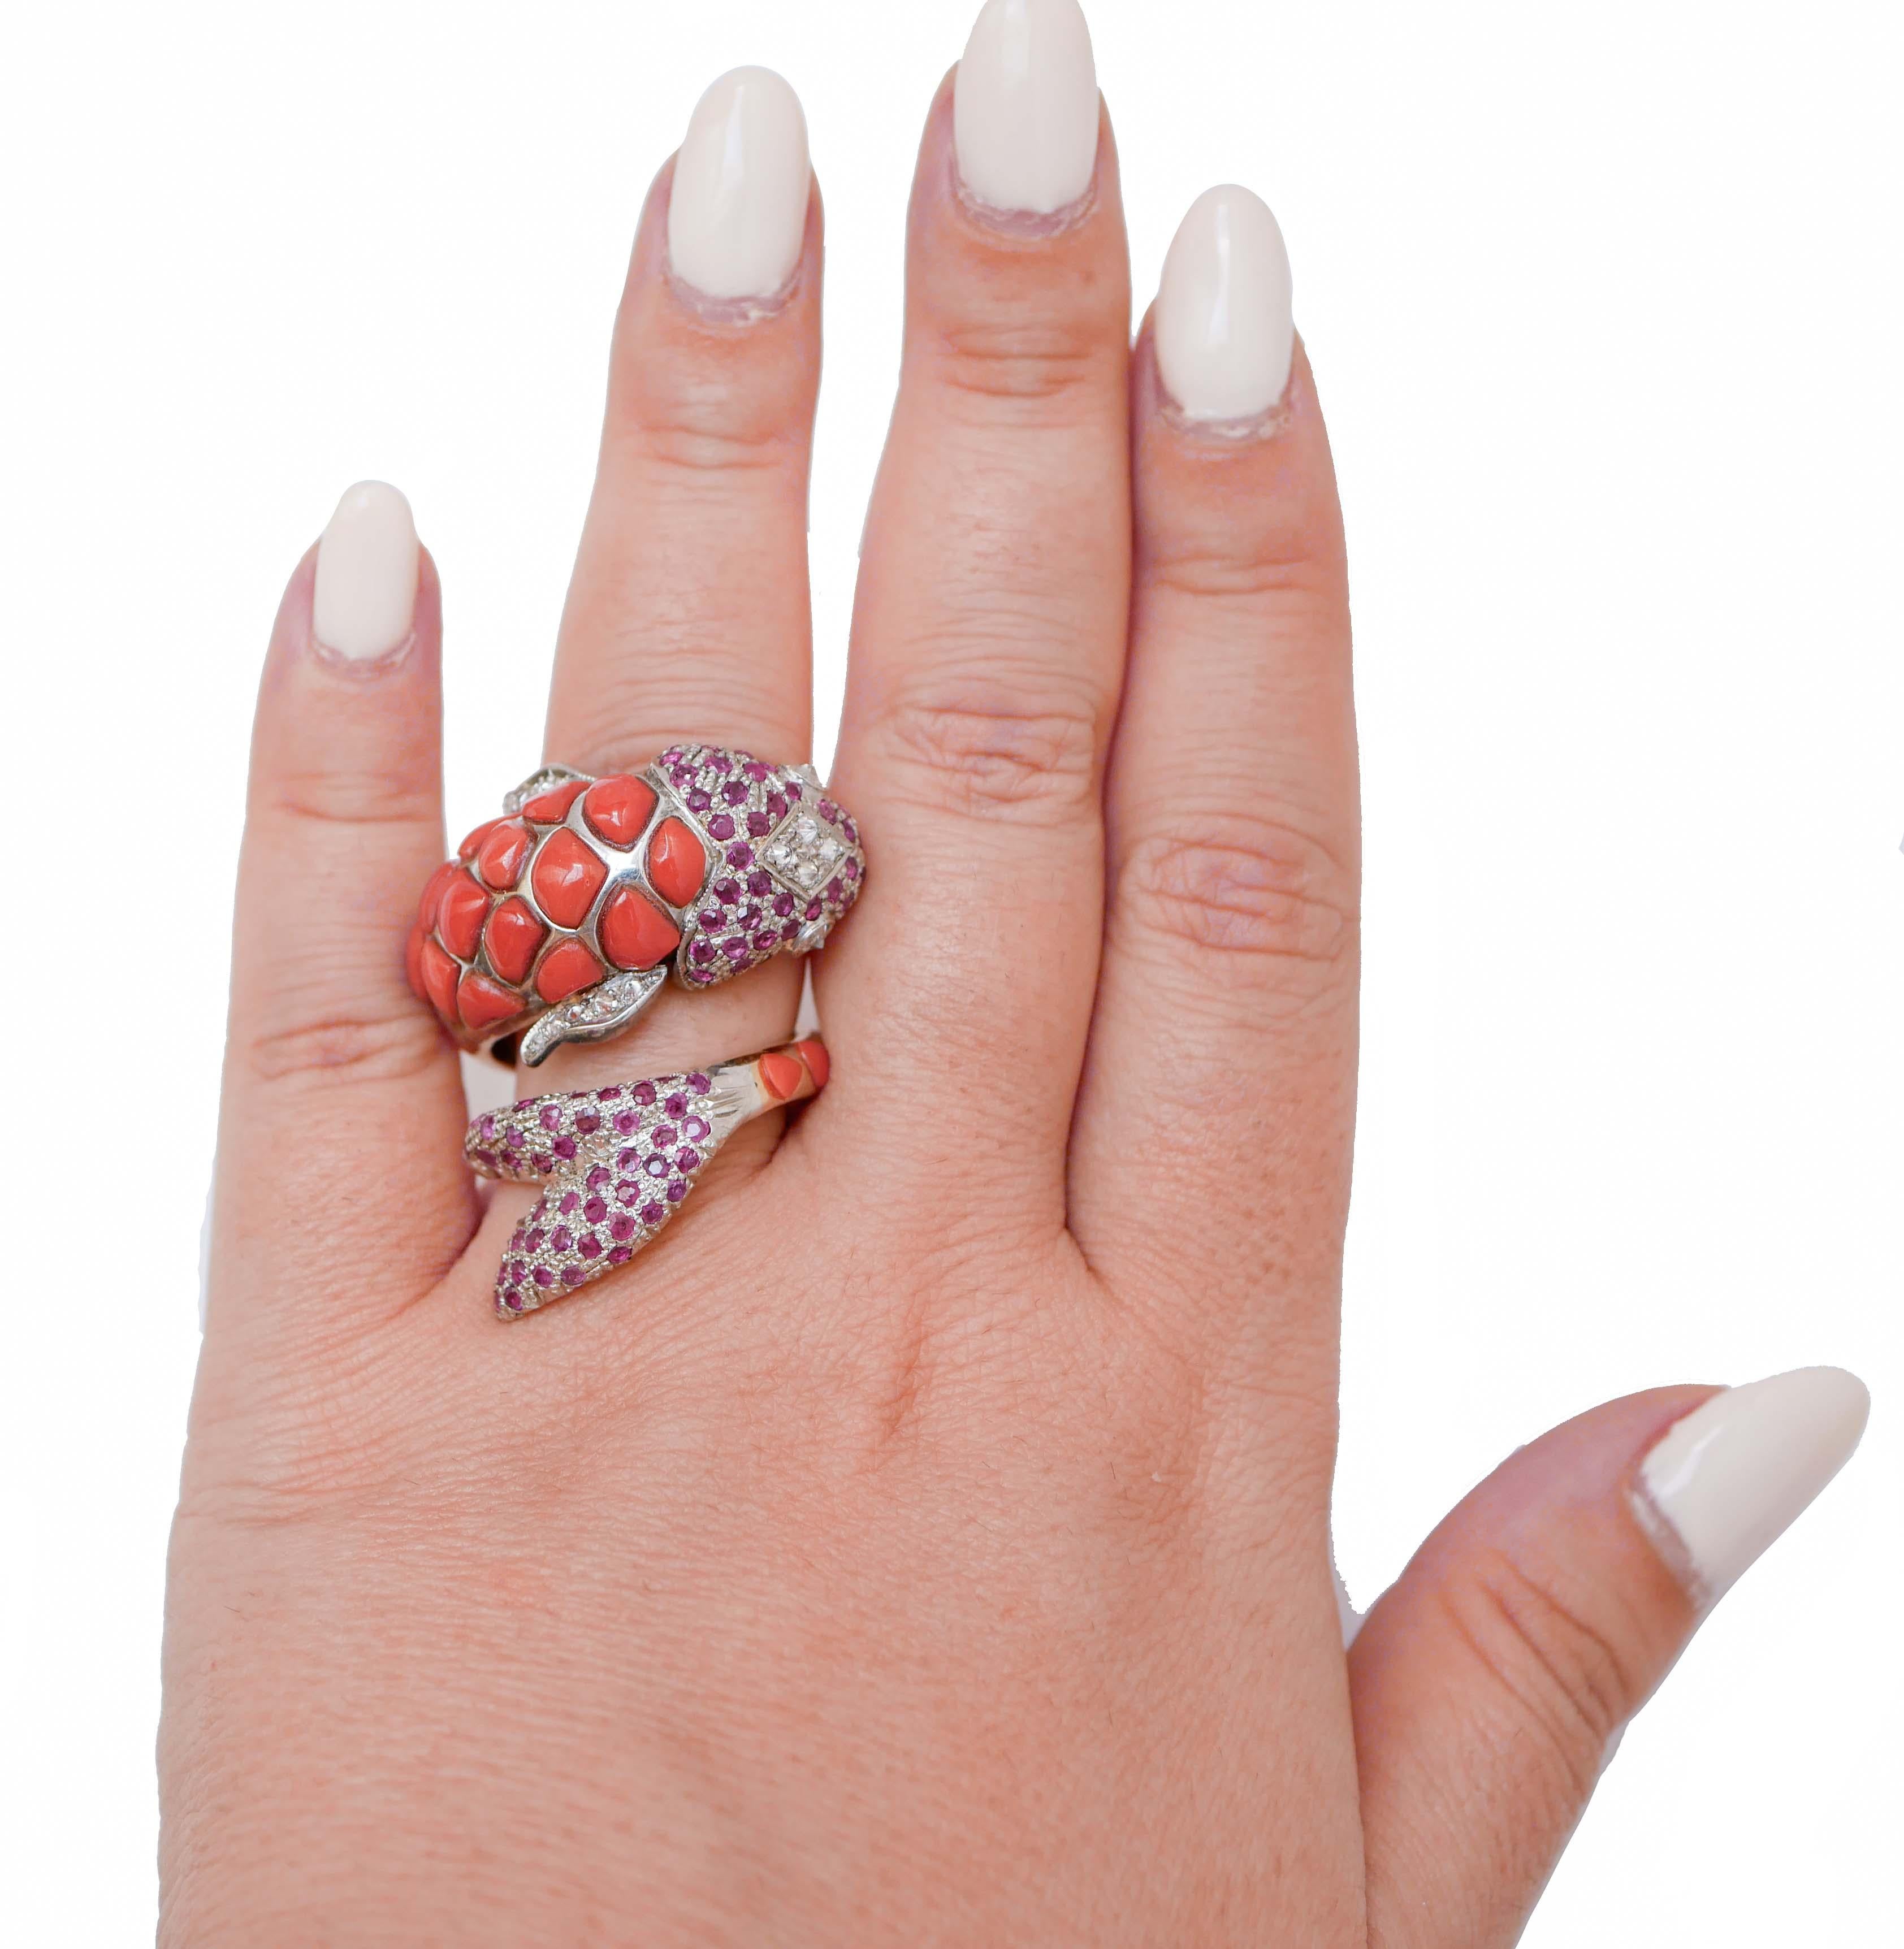 Mixed Cut Corals, Rubies, Diamonds, Rose Gold and Silver Fish Shape Ring. For Sale